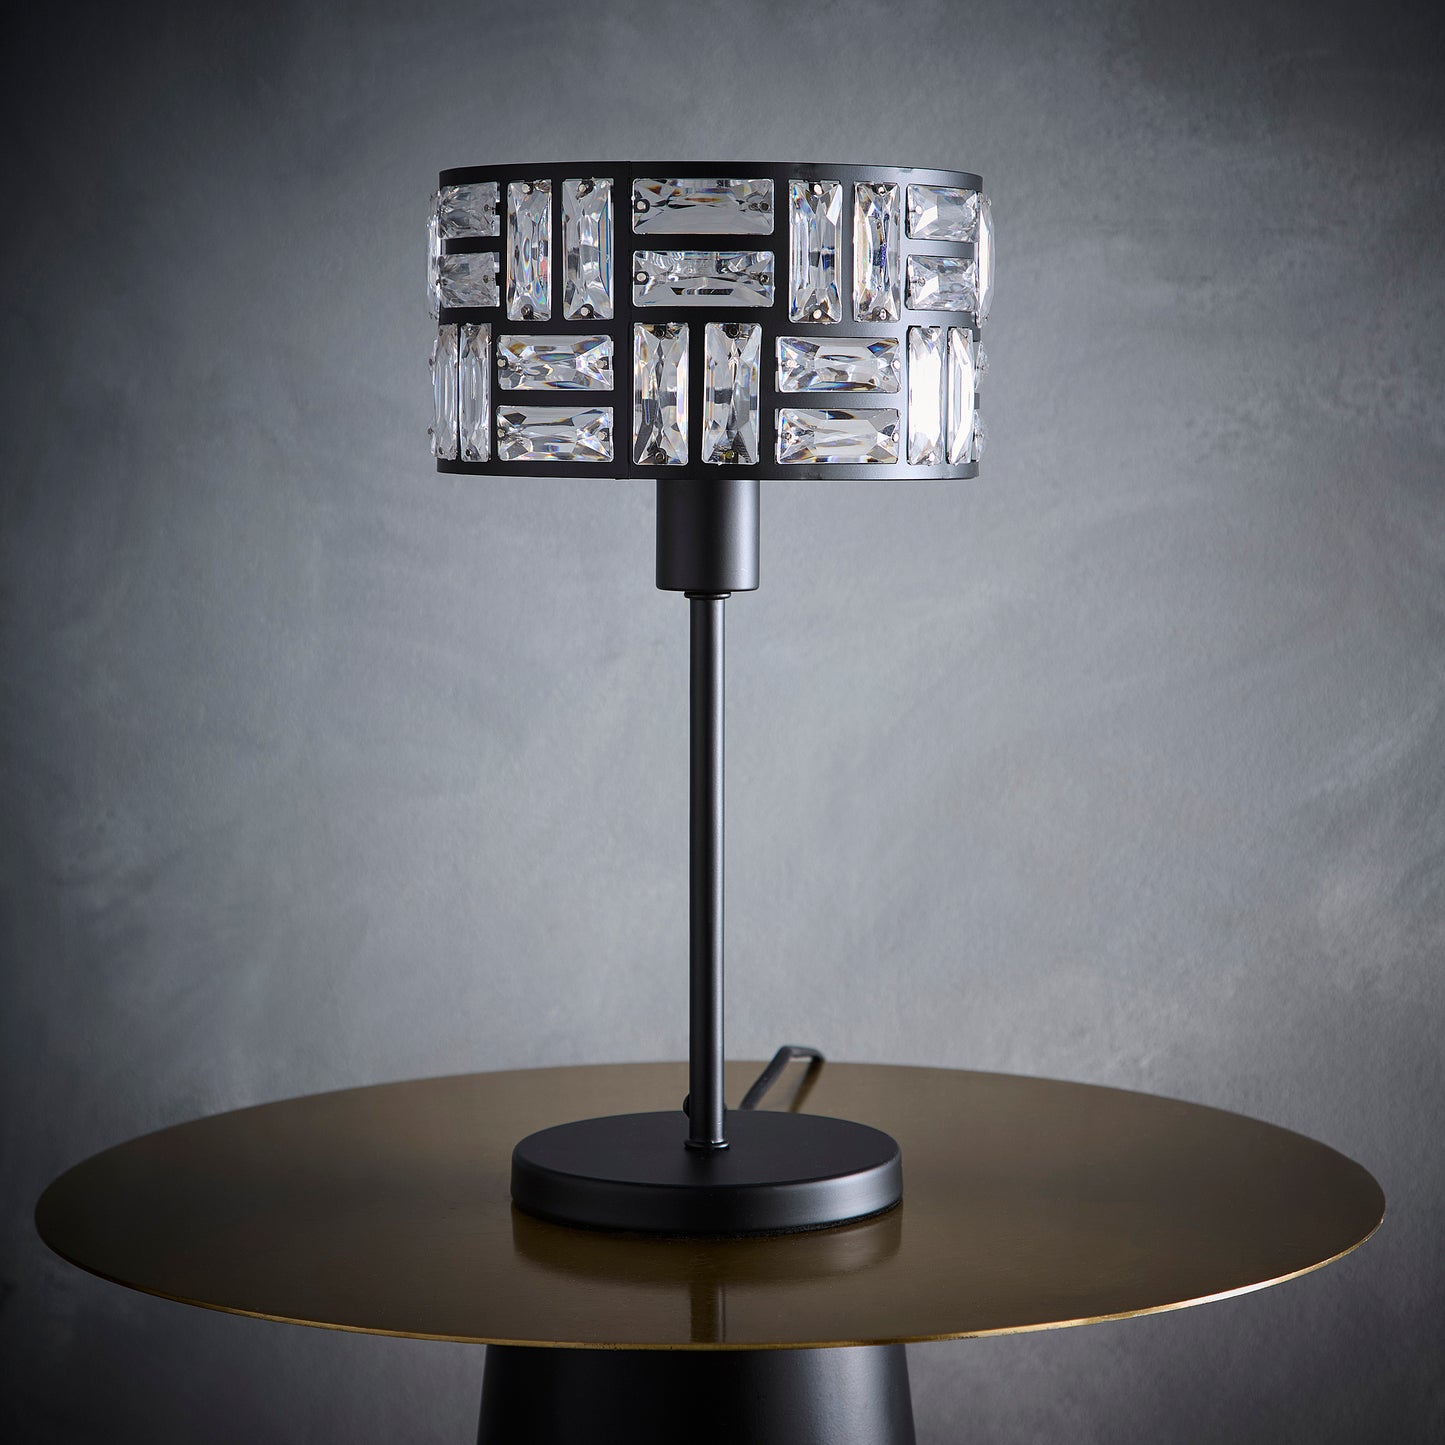 Black Table Lamp With Acrylic Glass Drum Shade in a Metal Cut Out Design